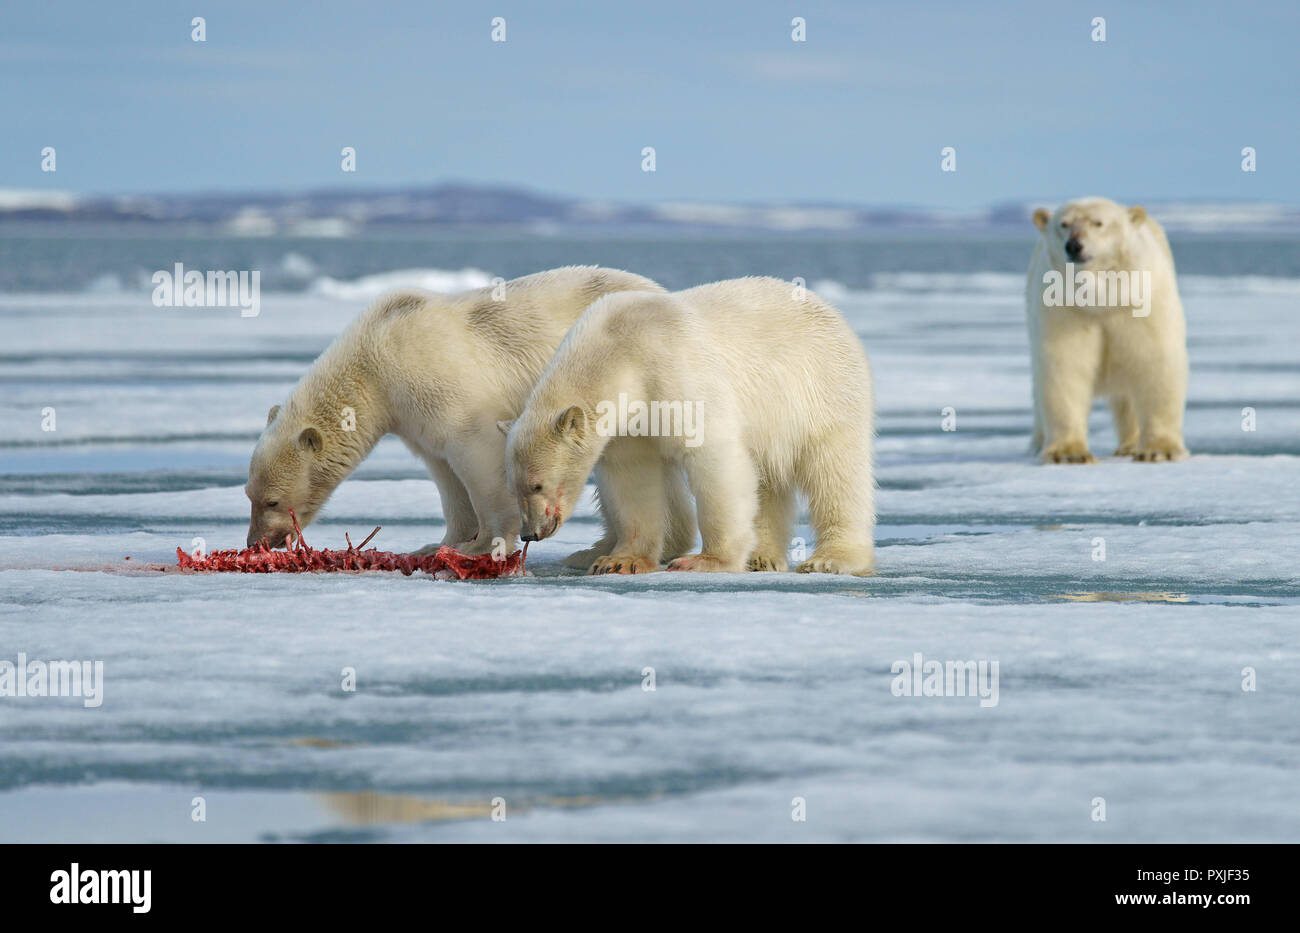 Polar bears (Ursus maritimus), young animals feeding on the carcass of a captured seal in the snow, mother animal in the back Stock Photo